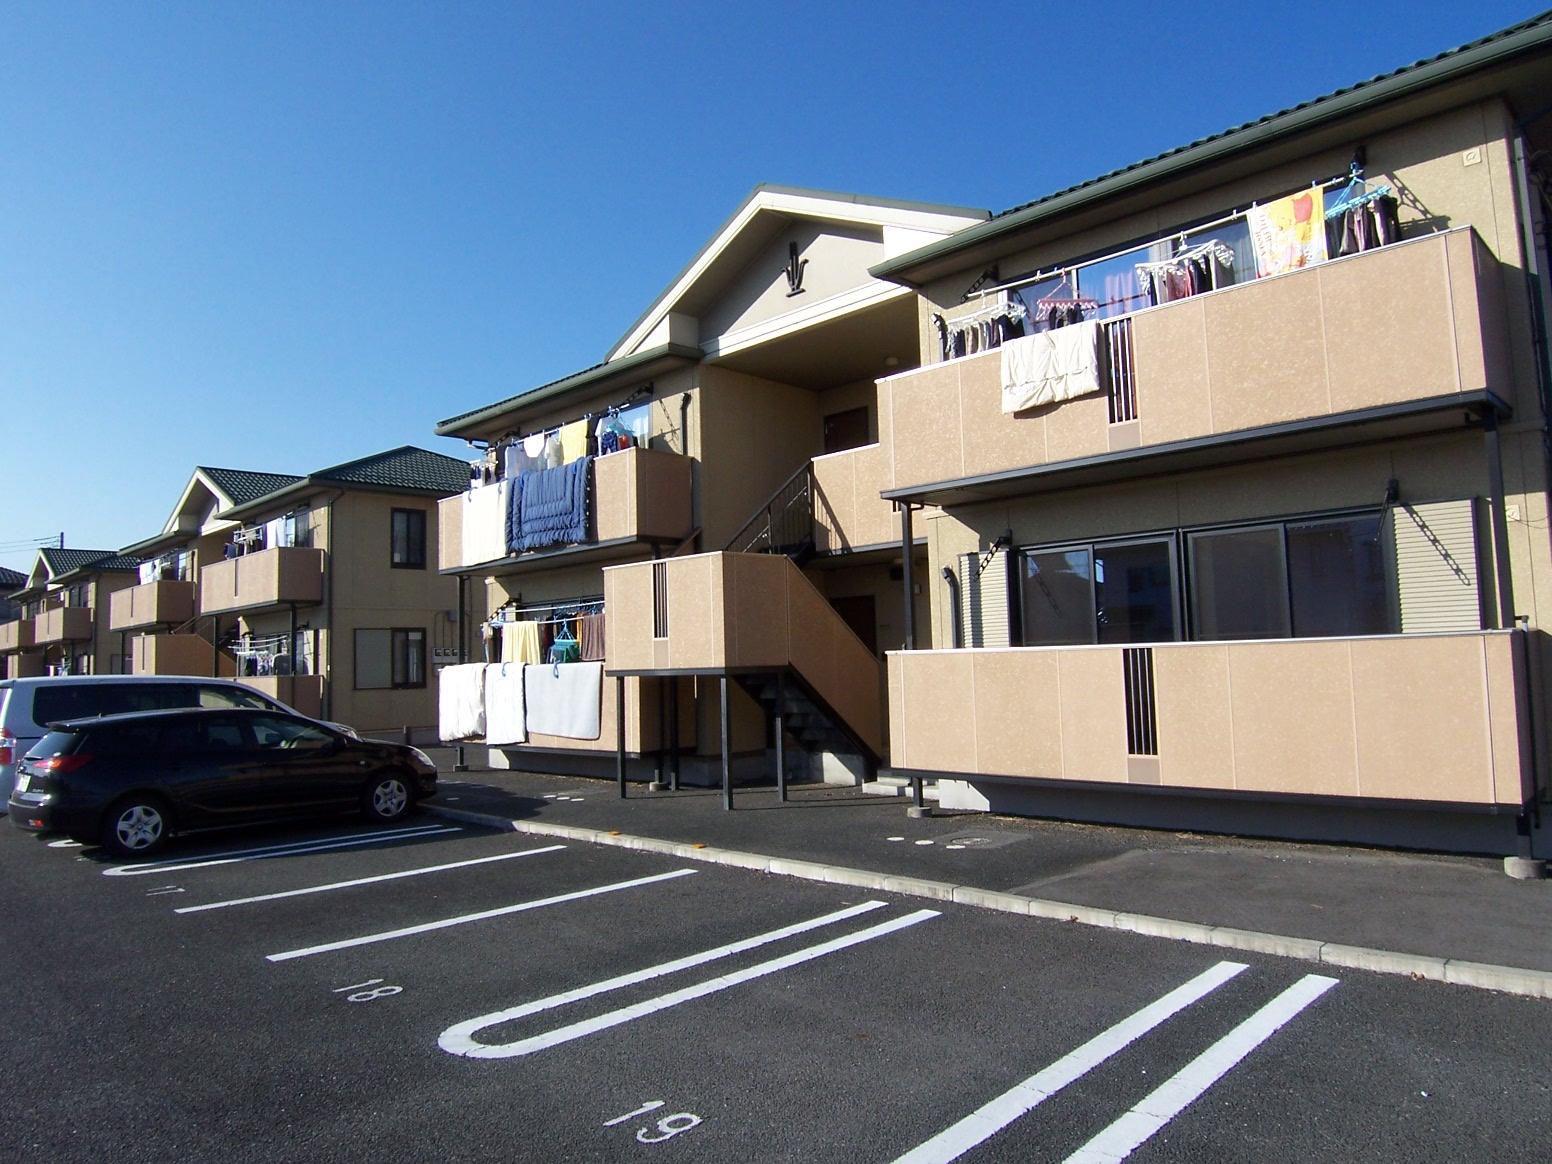 Building appearance. There is also a balcony on the first floor. It is convenient to hang out futon